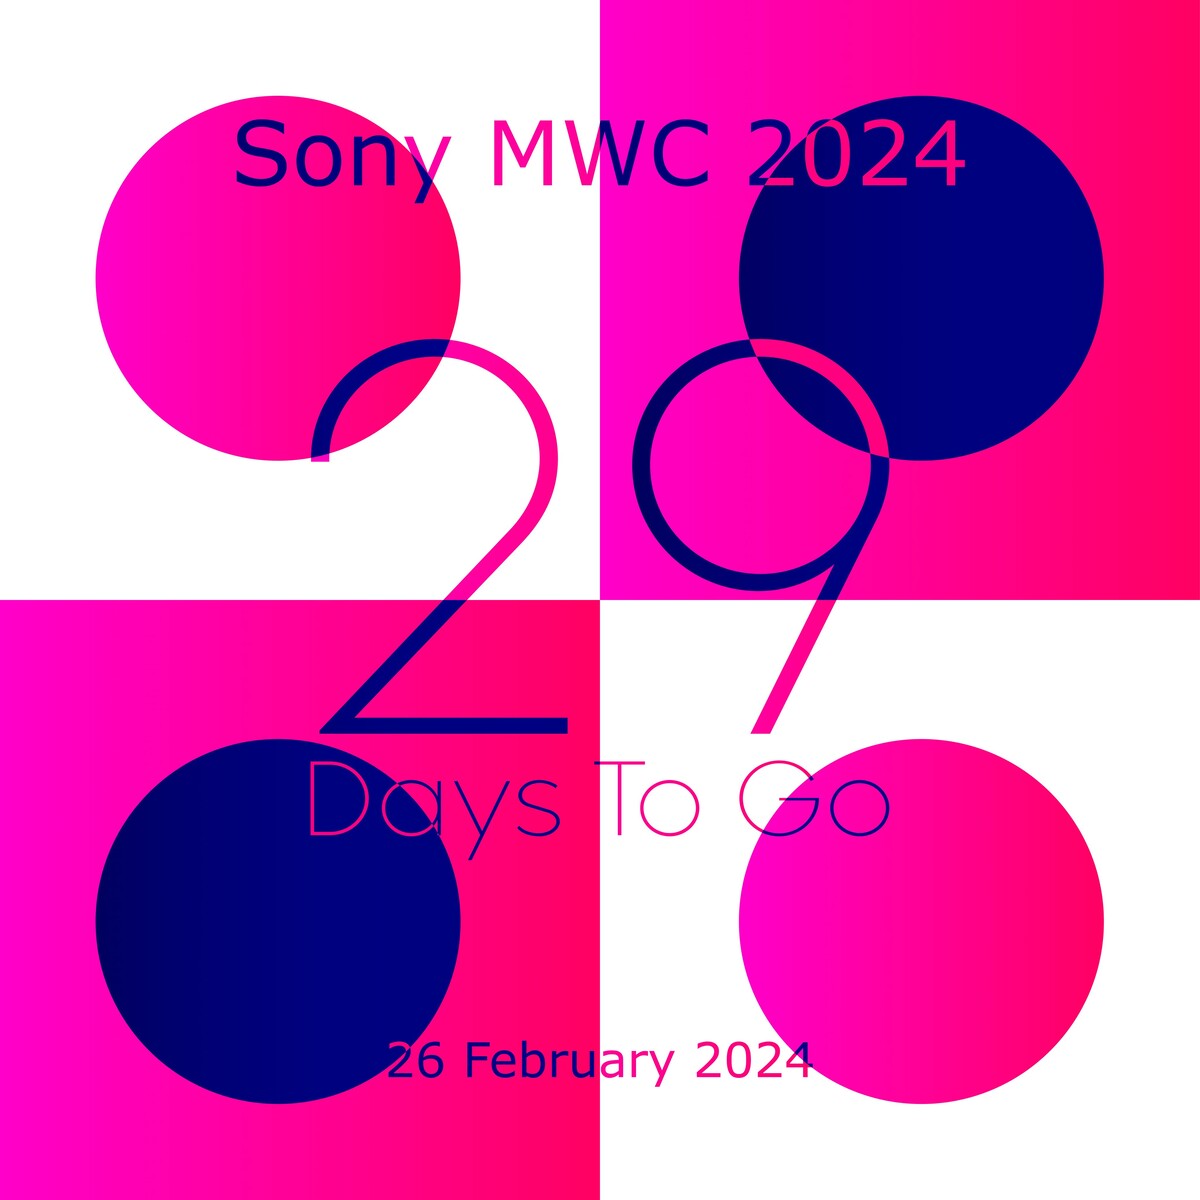 csm_Sony-MWC-2024-poster_3ee0278106.jpg